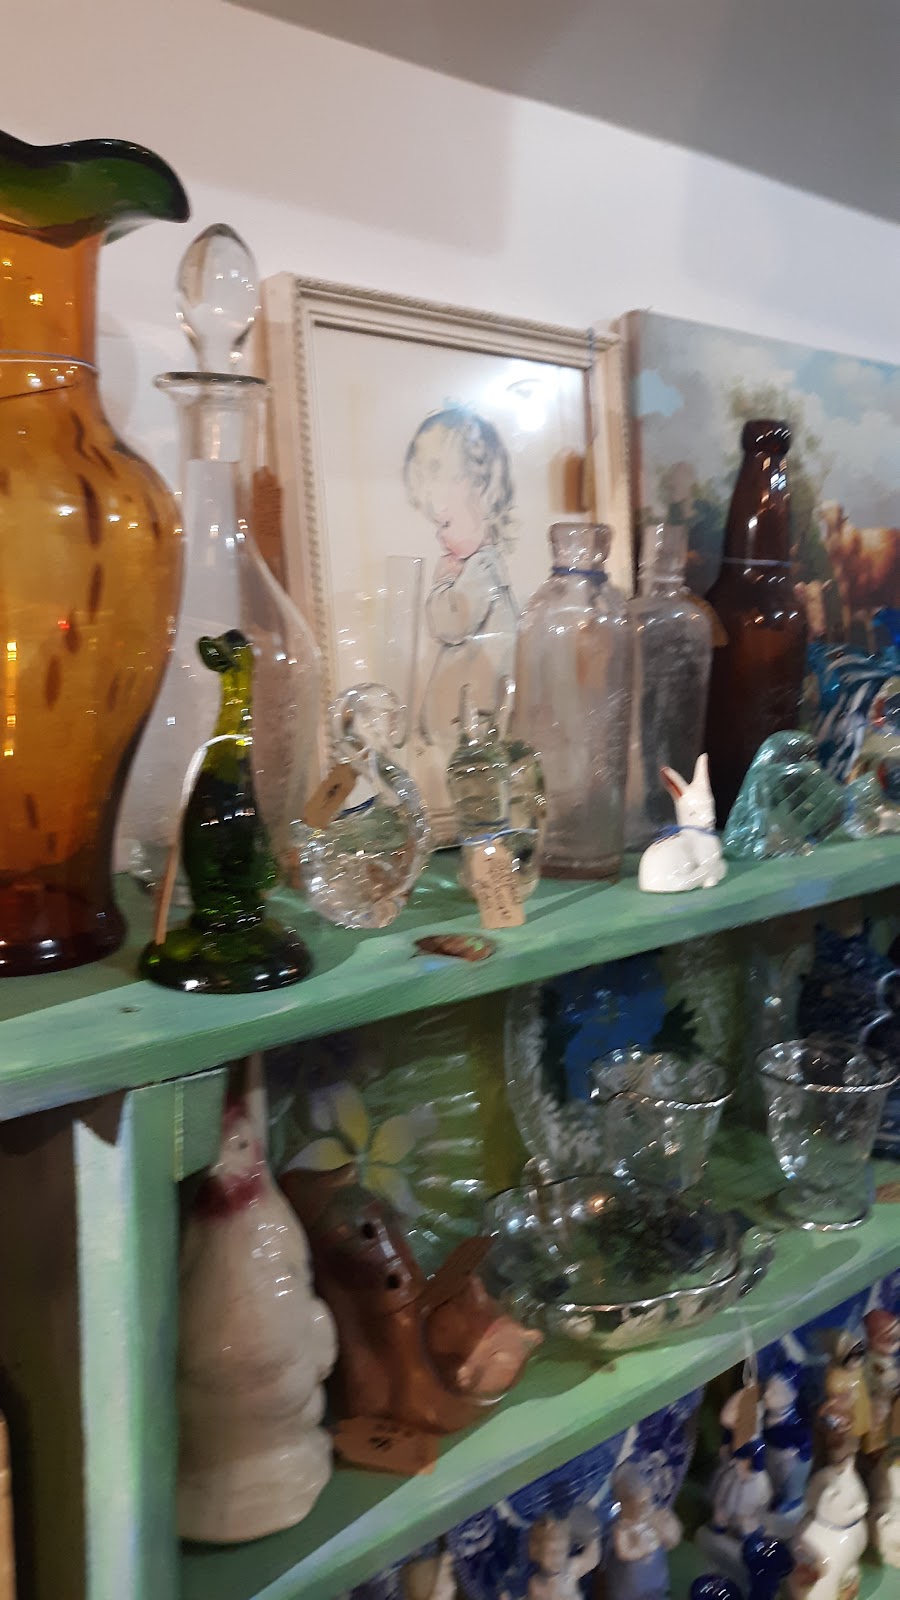 And All That Jazz Antiques | 107 Stockbridge Rd, Great Barrington, MA 01230 | Phone: (413) 528-8880